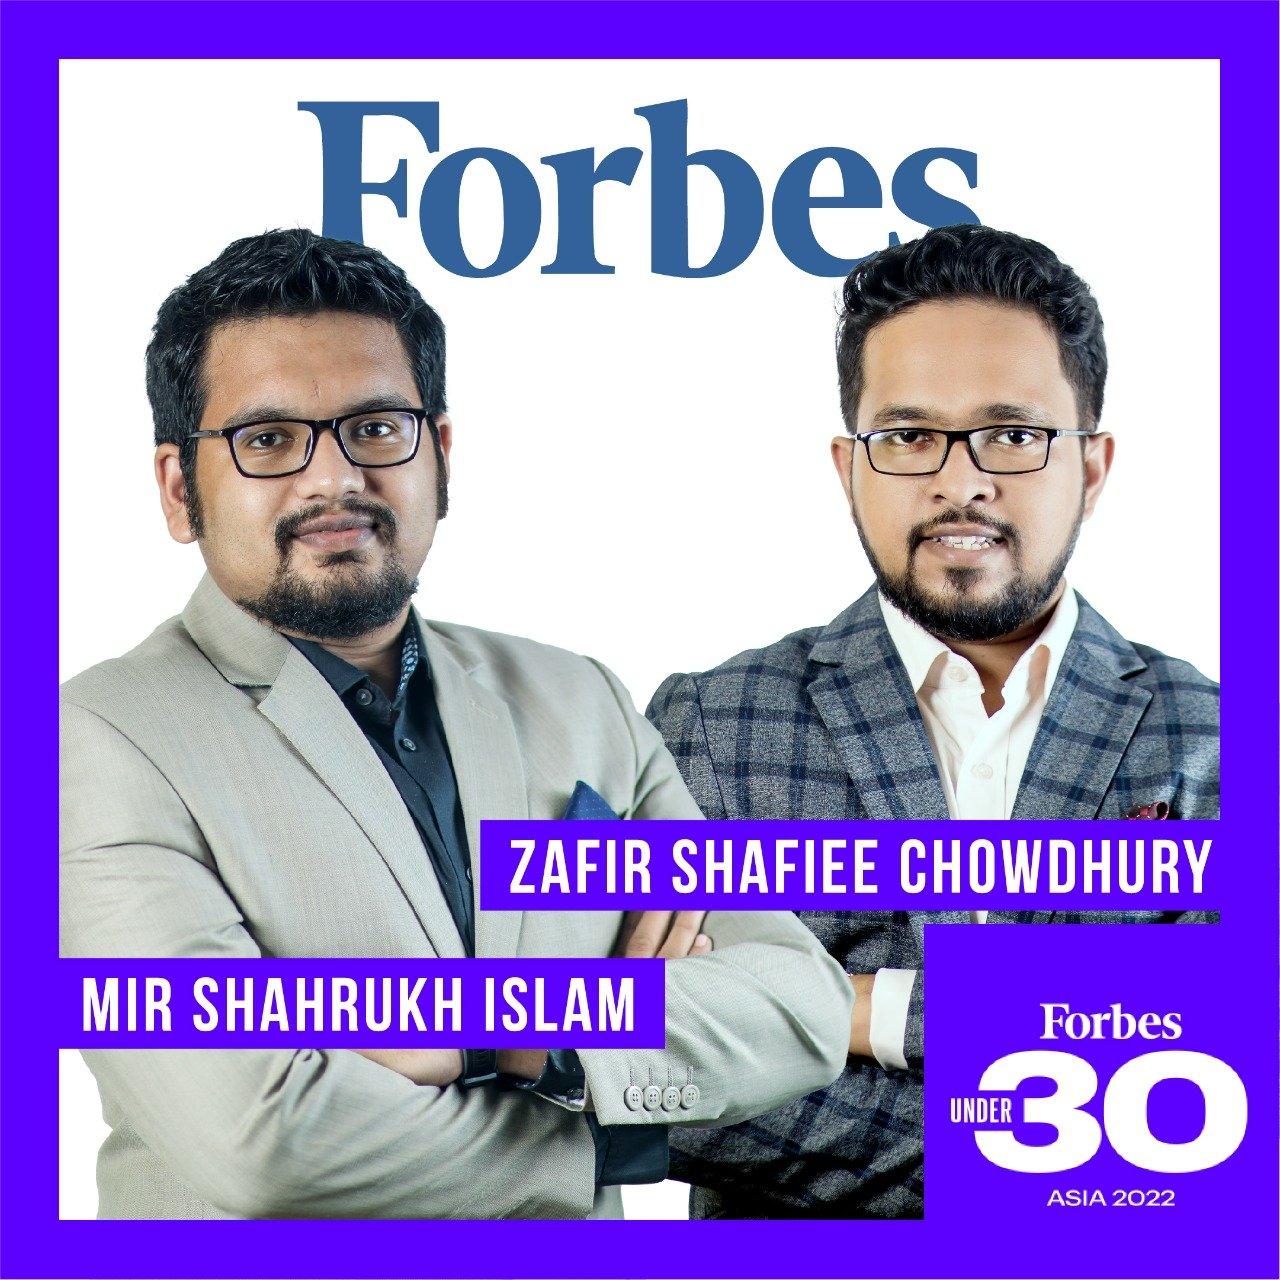 Two IUT'ians Featured on Forbes 30 Under 30!